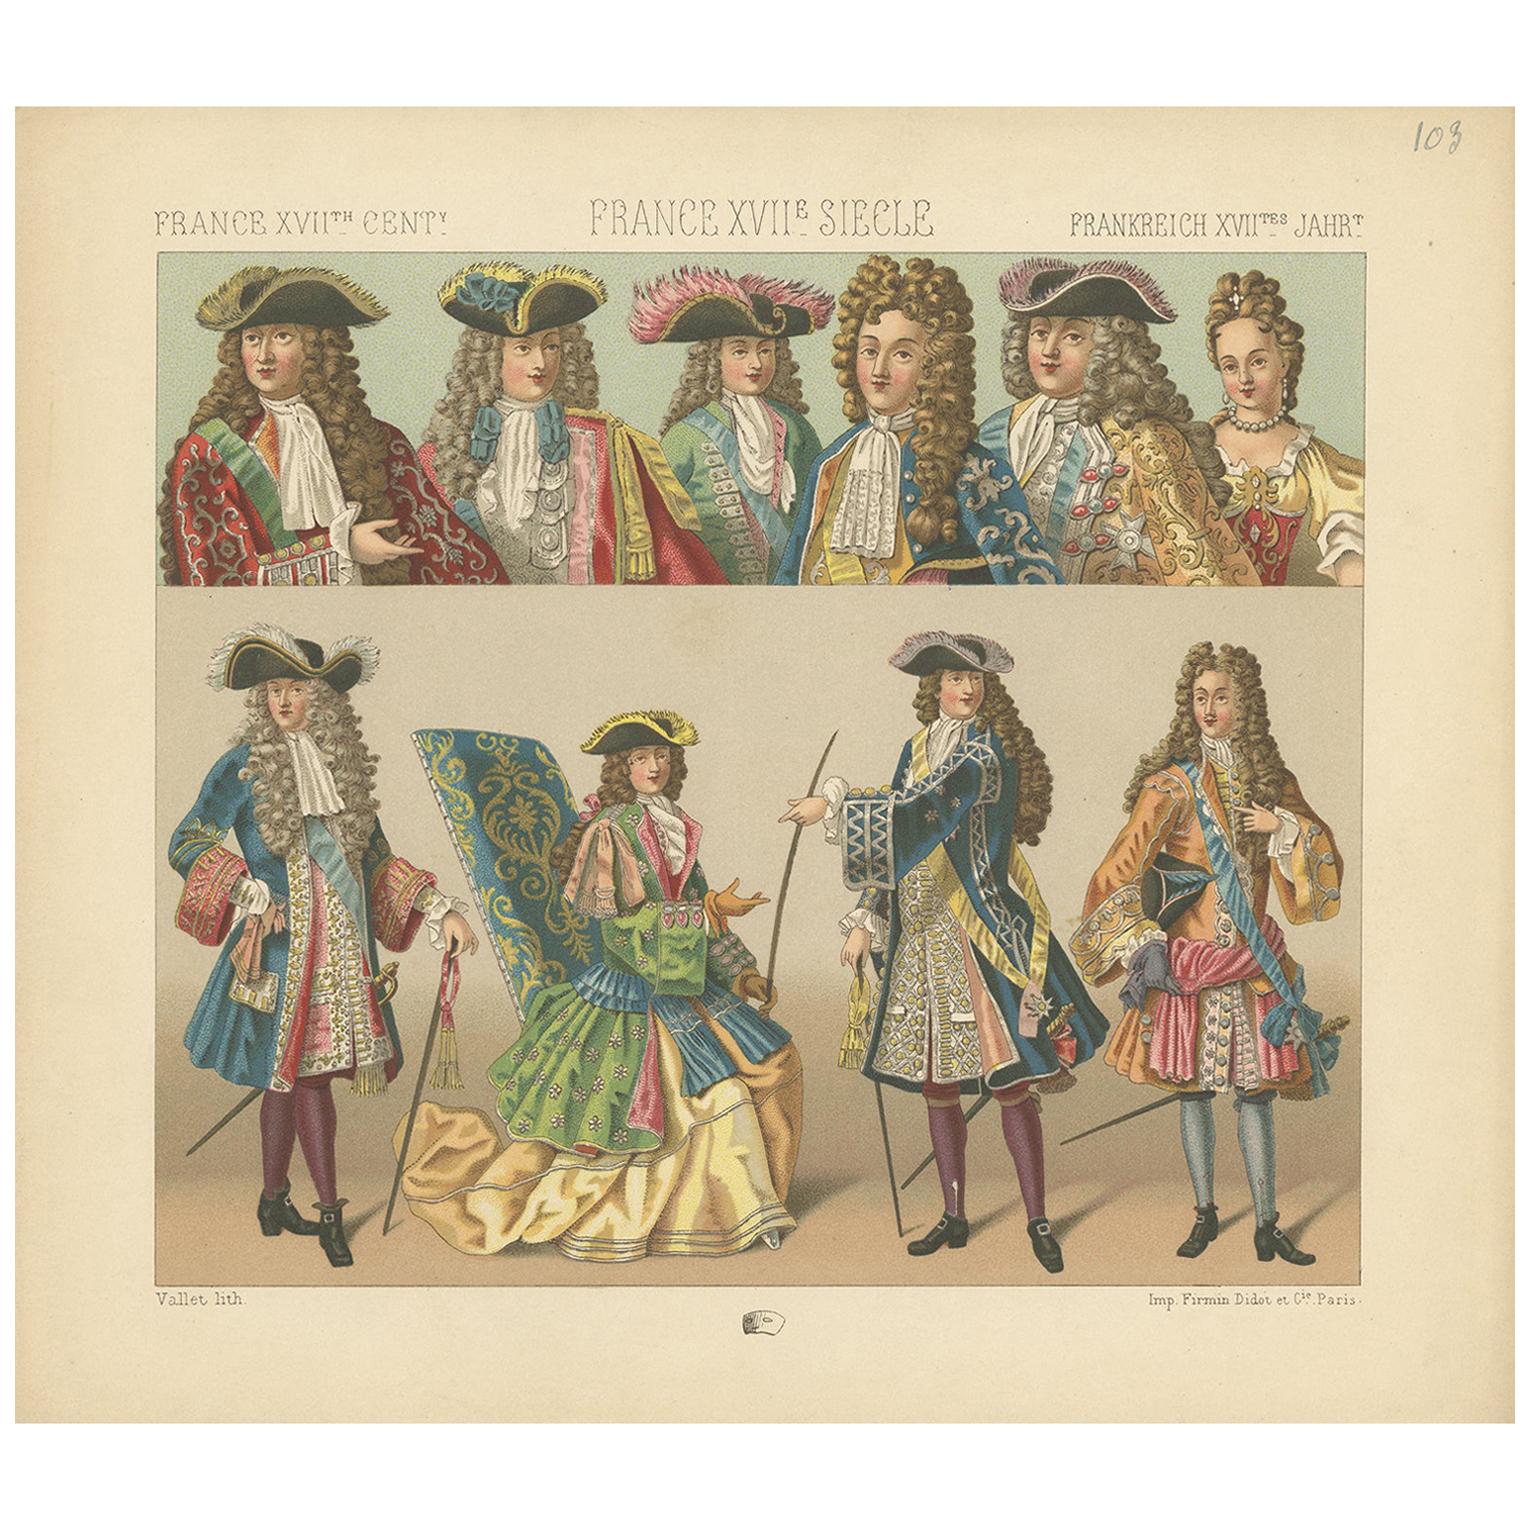 Pl. 103 Antique Print of French 17th Century Costumes by Racinet, circa 1880